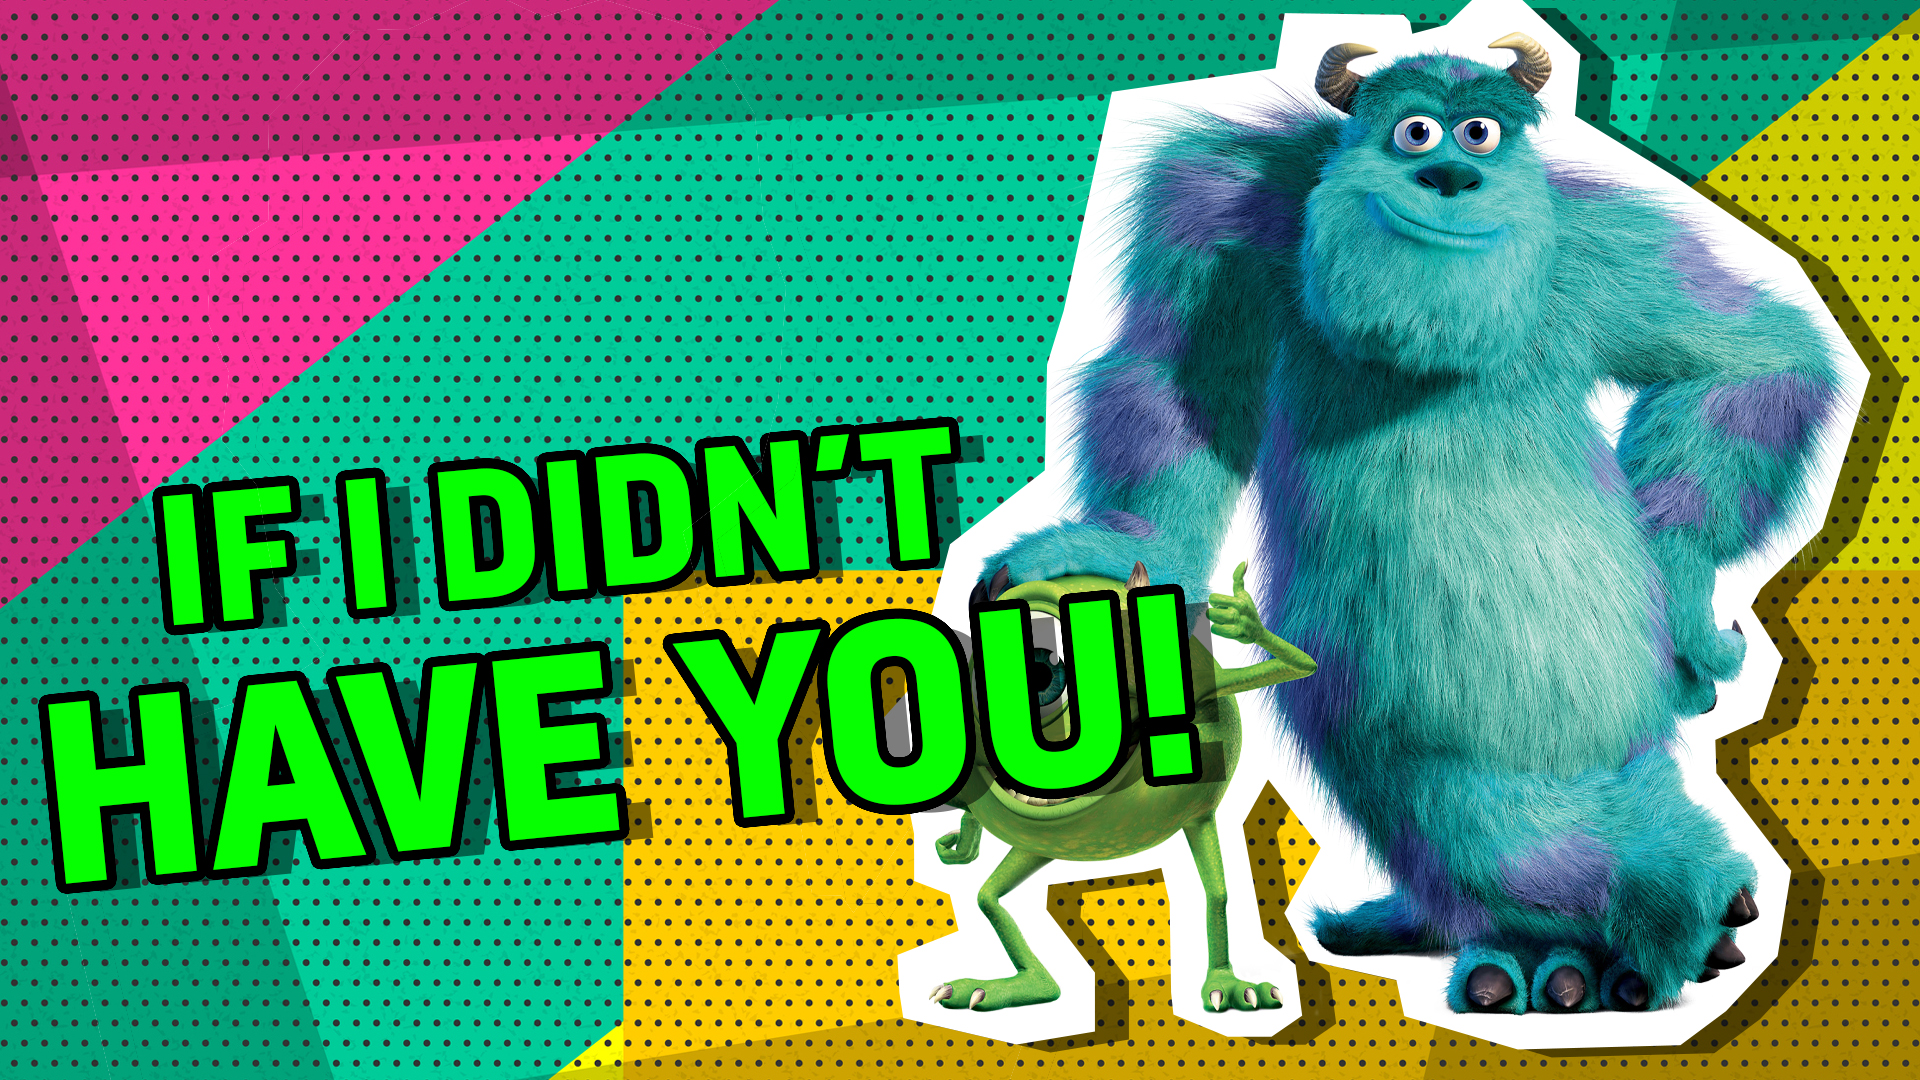 Mike and Sully in Monsters Inc